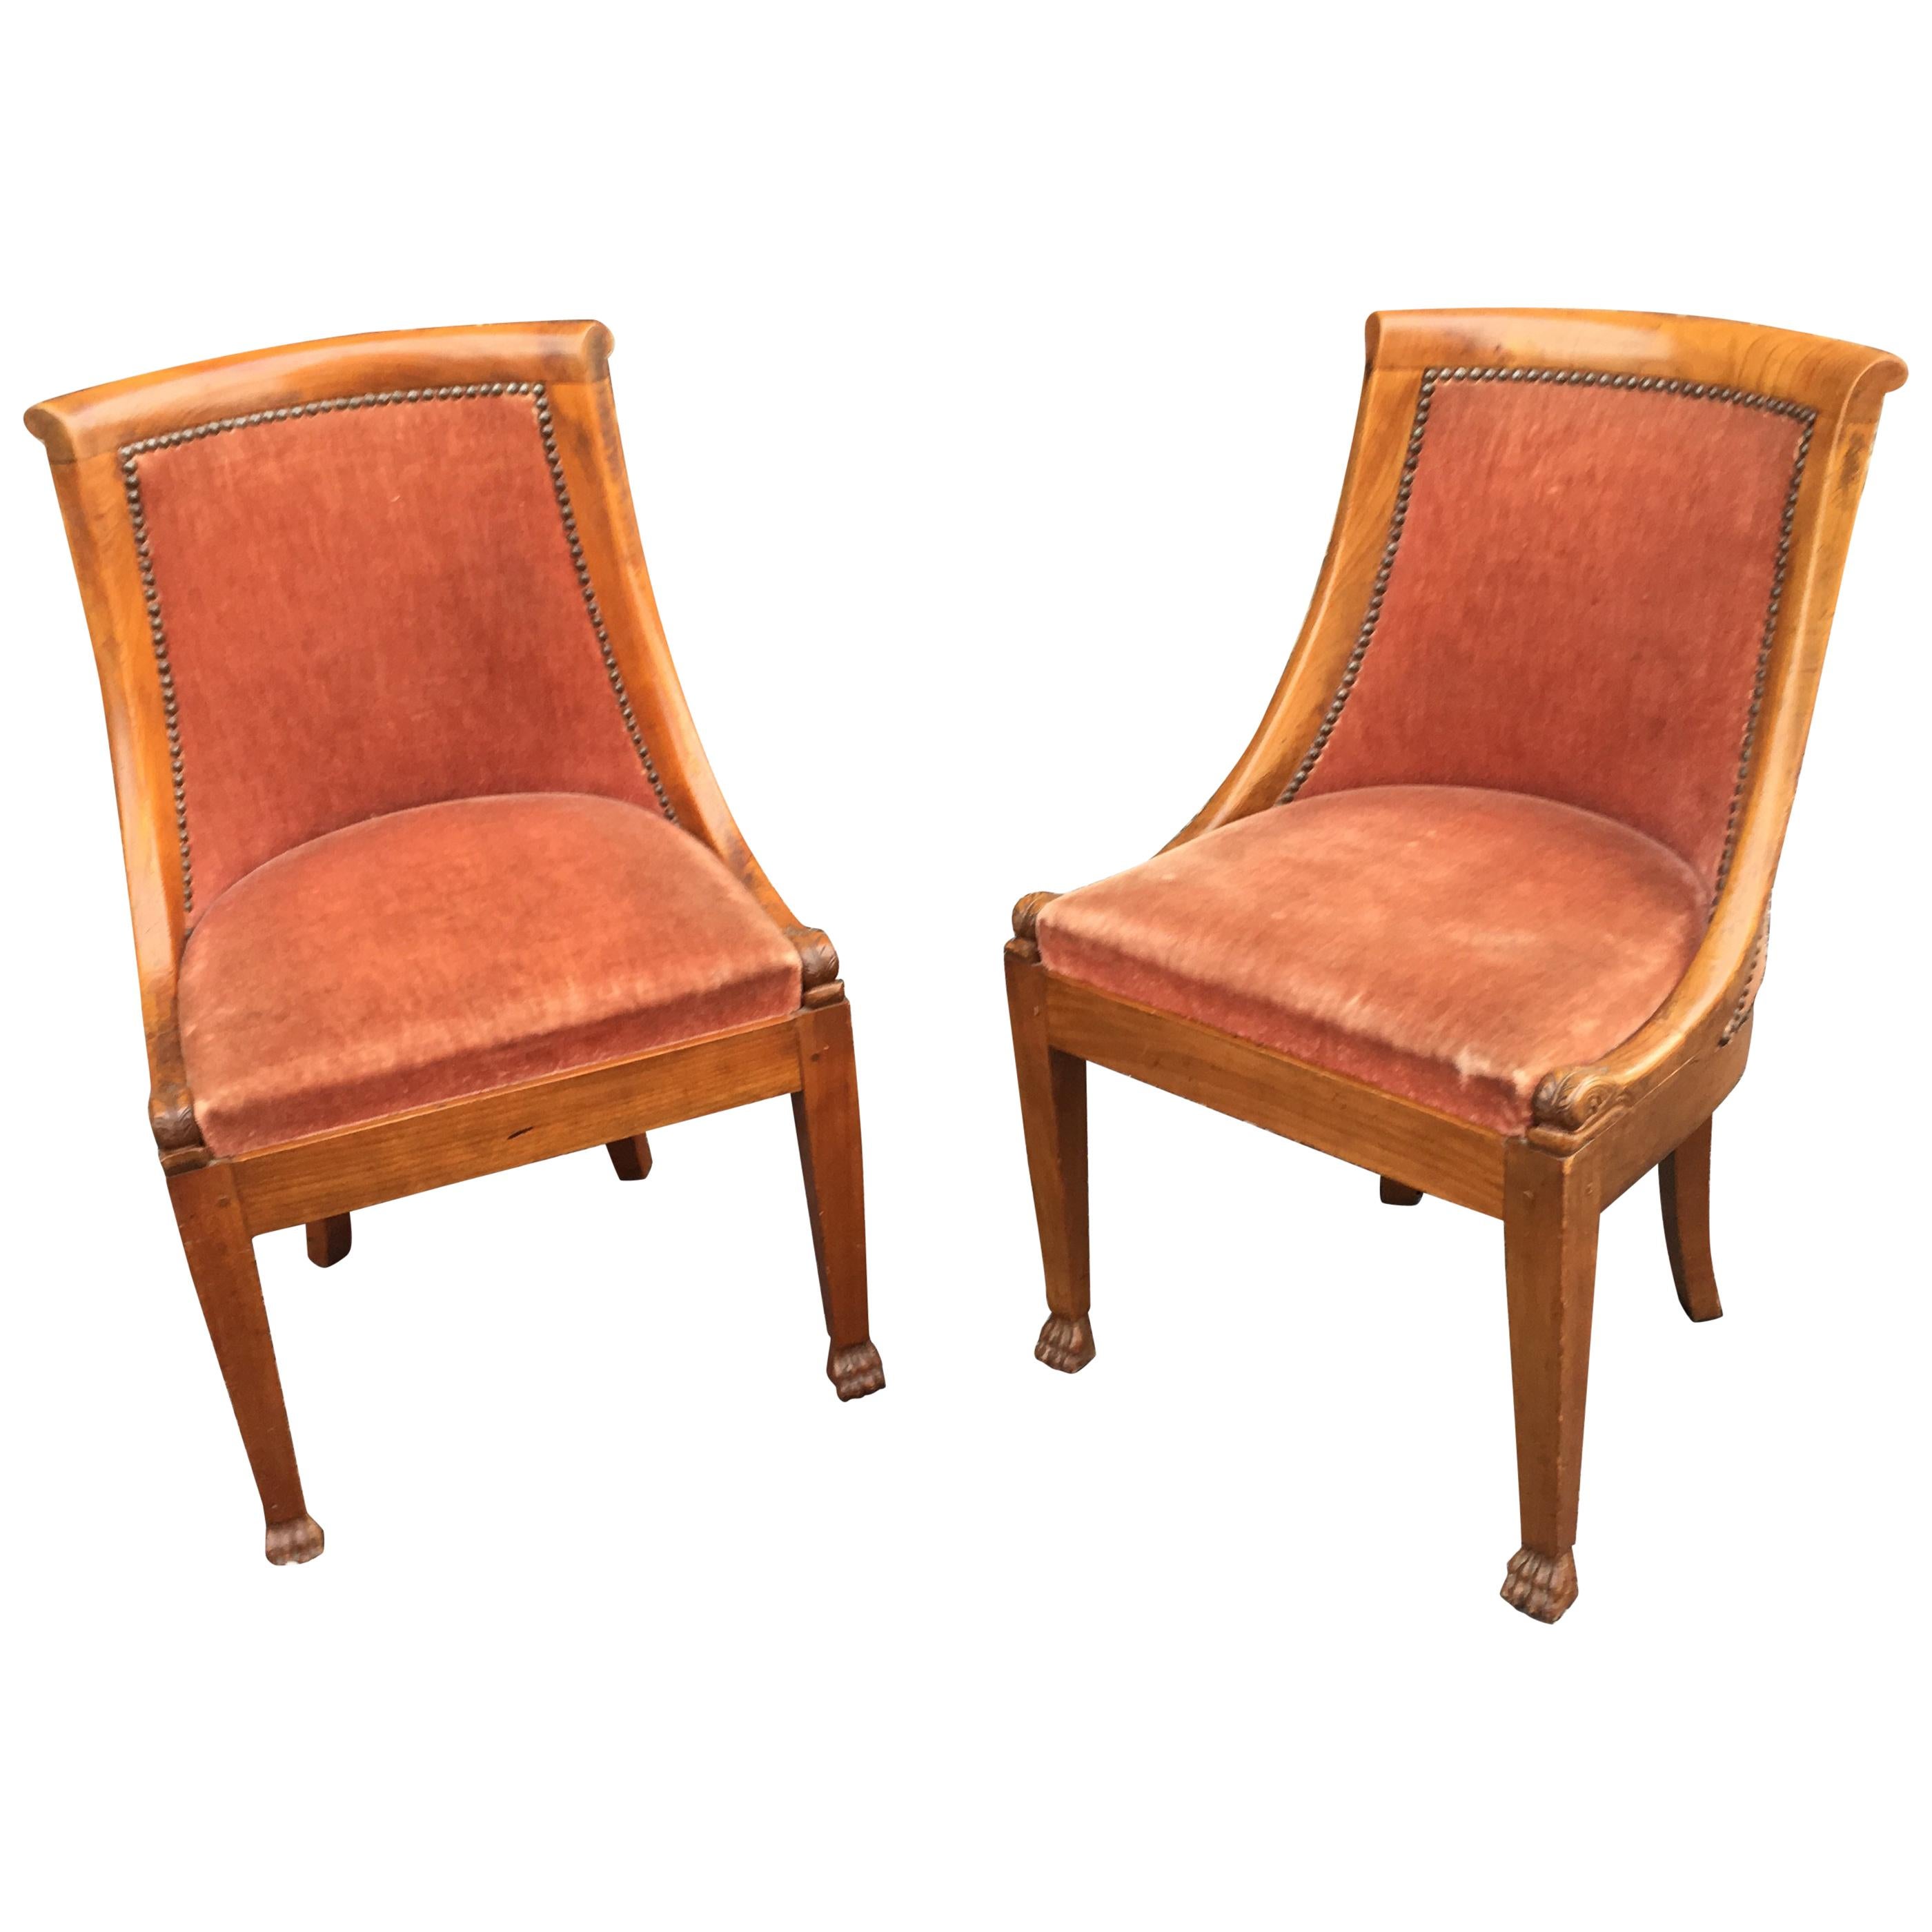 Suite of 8 empire style chairs in solid cherrywood,
velvet to change
small old restorations.